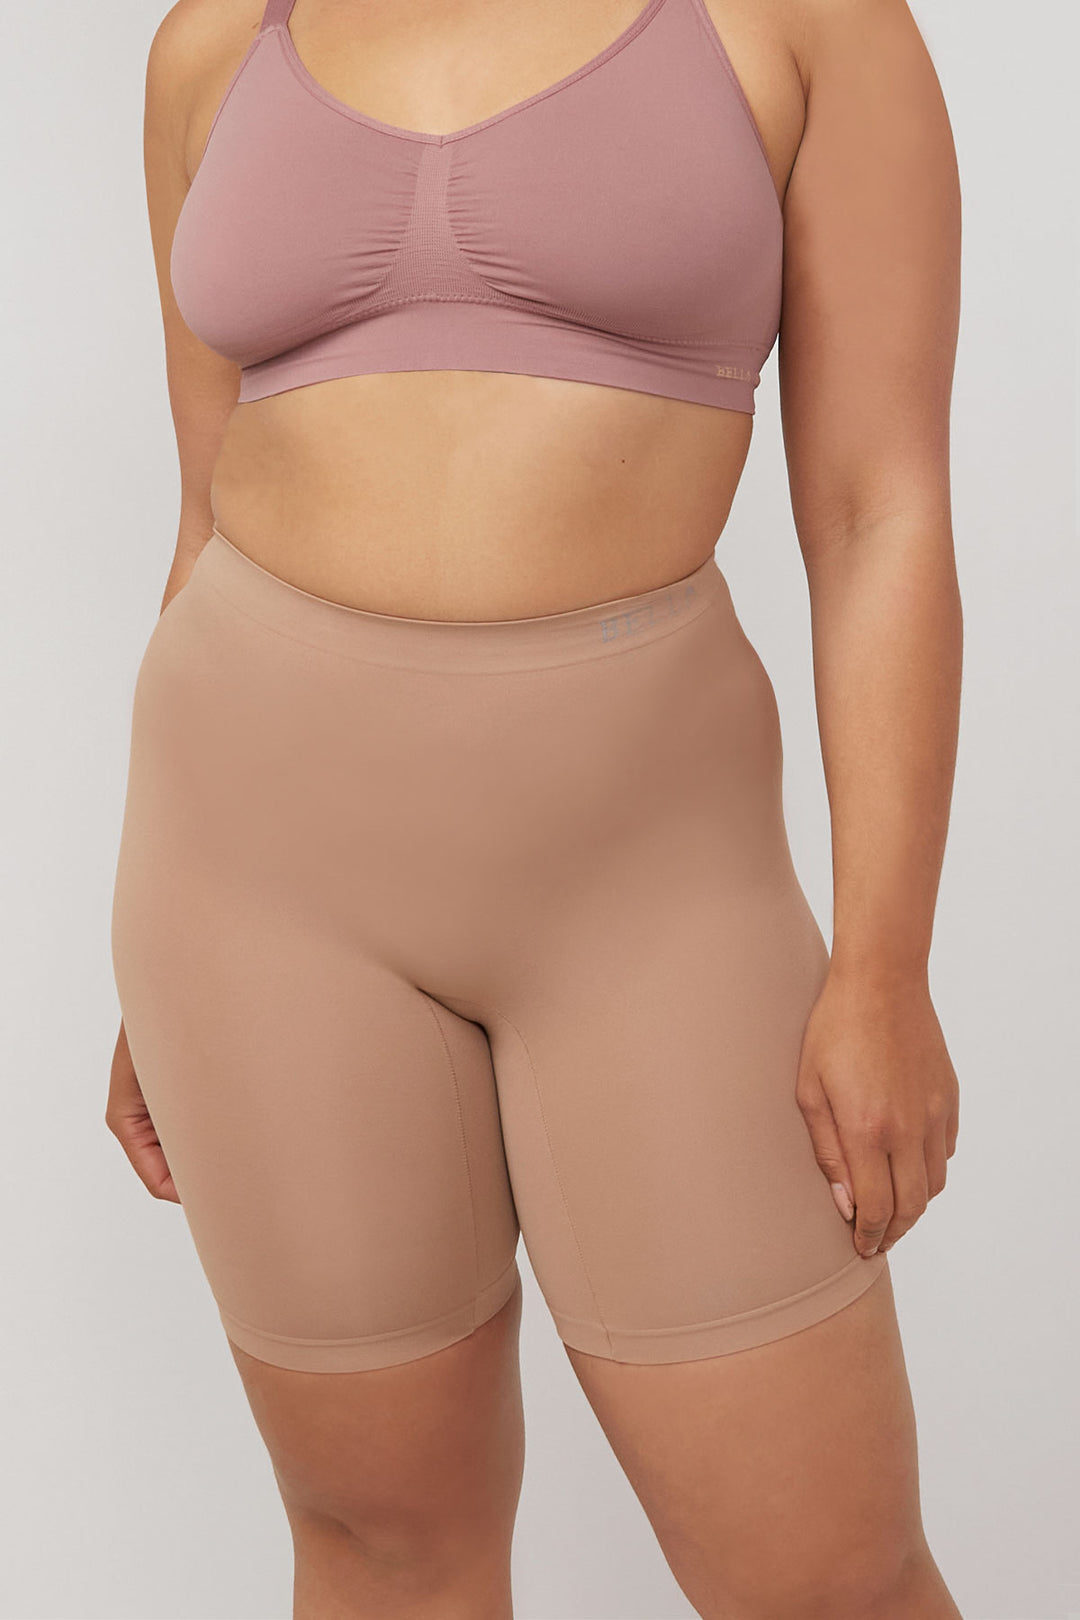 Anti-Chafe Shorts for £13 - All Accessories - Hunkemöller